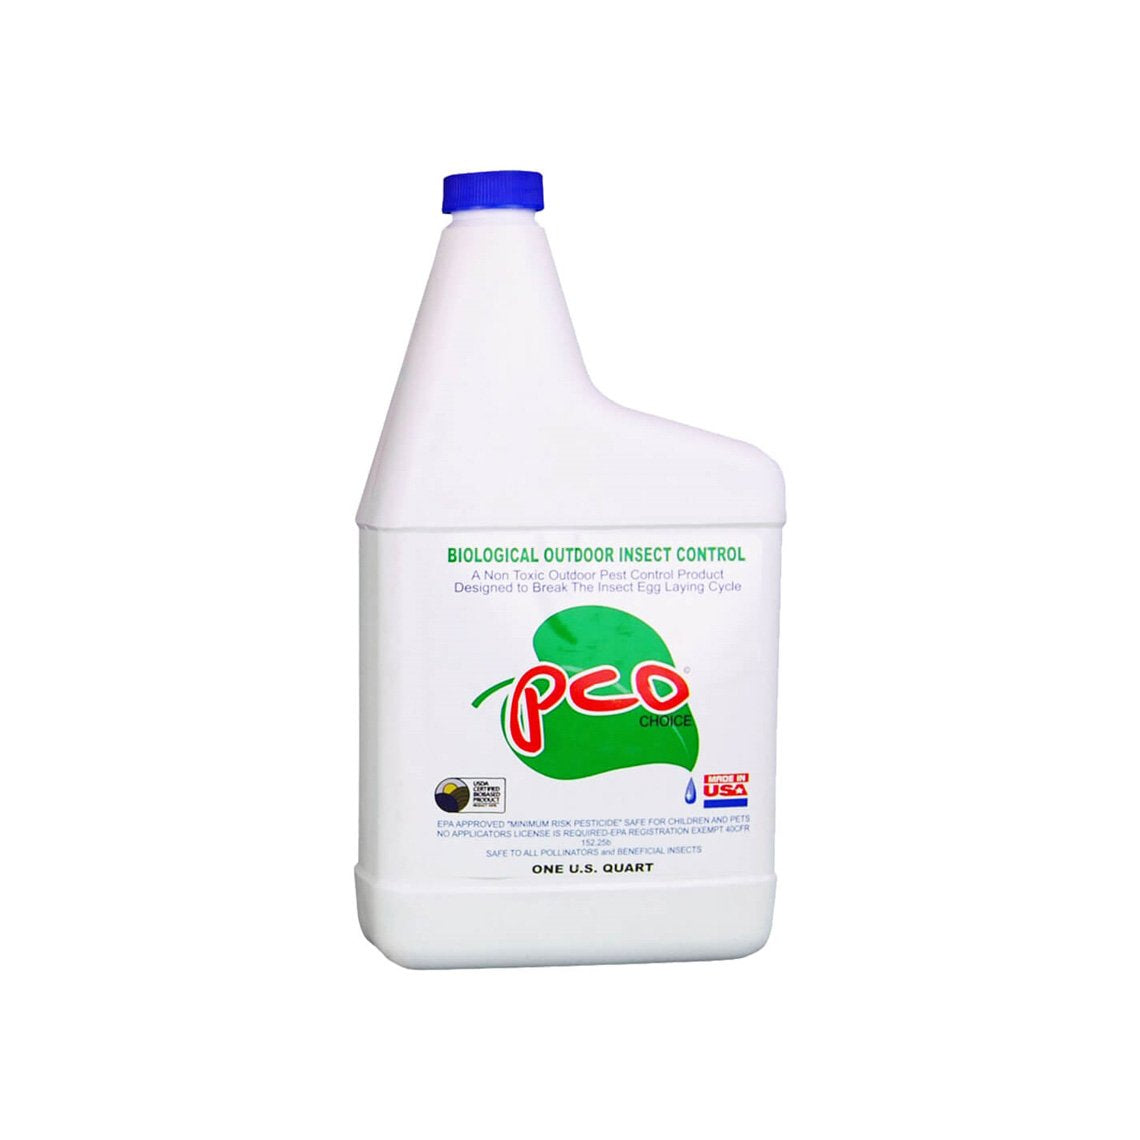 CedarCide Pco Choice Biological Outdoor Insect Control Yard & Lawn Spray